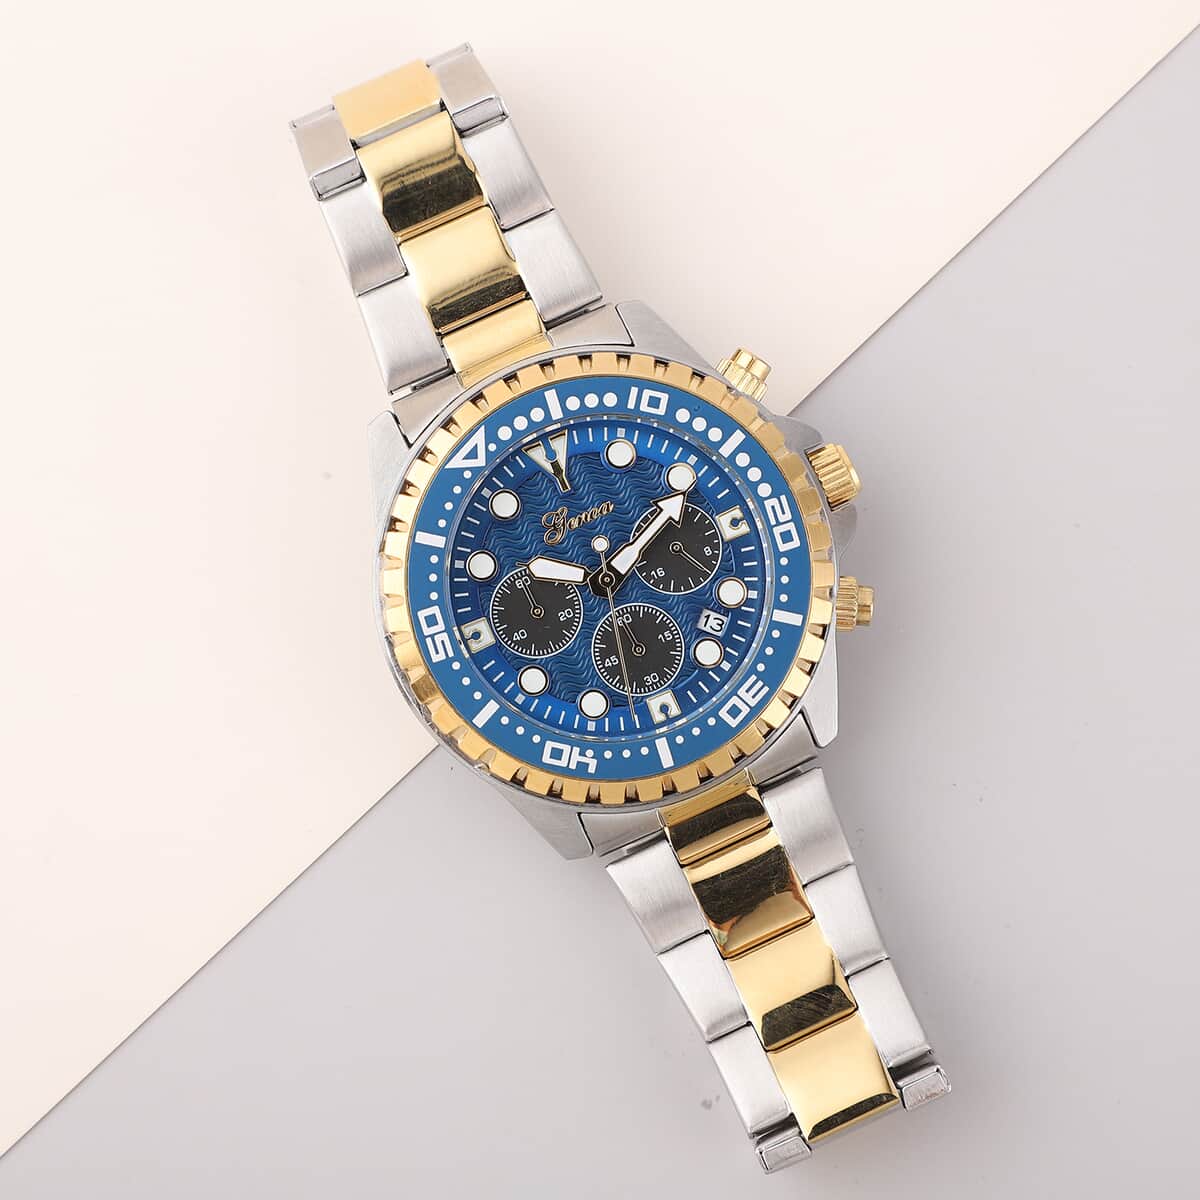 Genoa Multi-functional Quartz Movement Watch with Blue Dial & Stainless Steel Strap (46 mm) image number 1